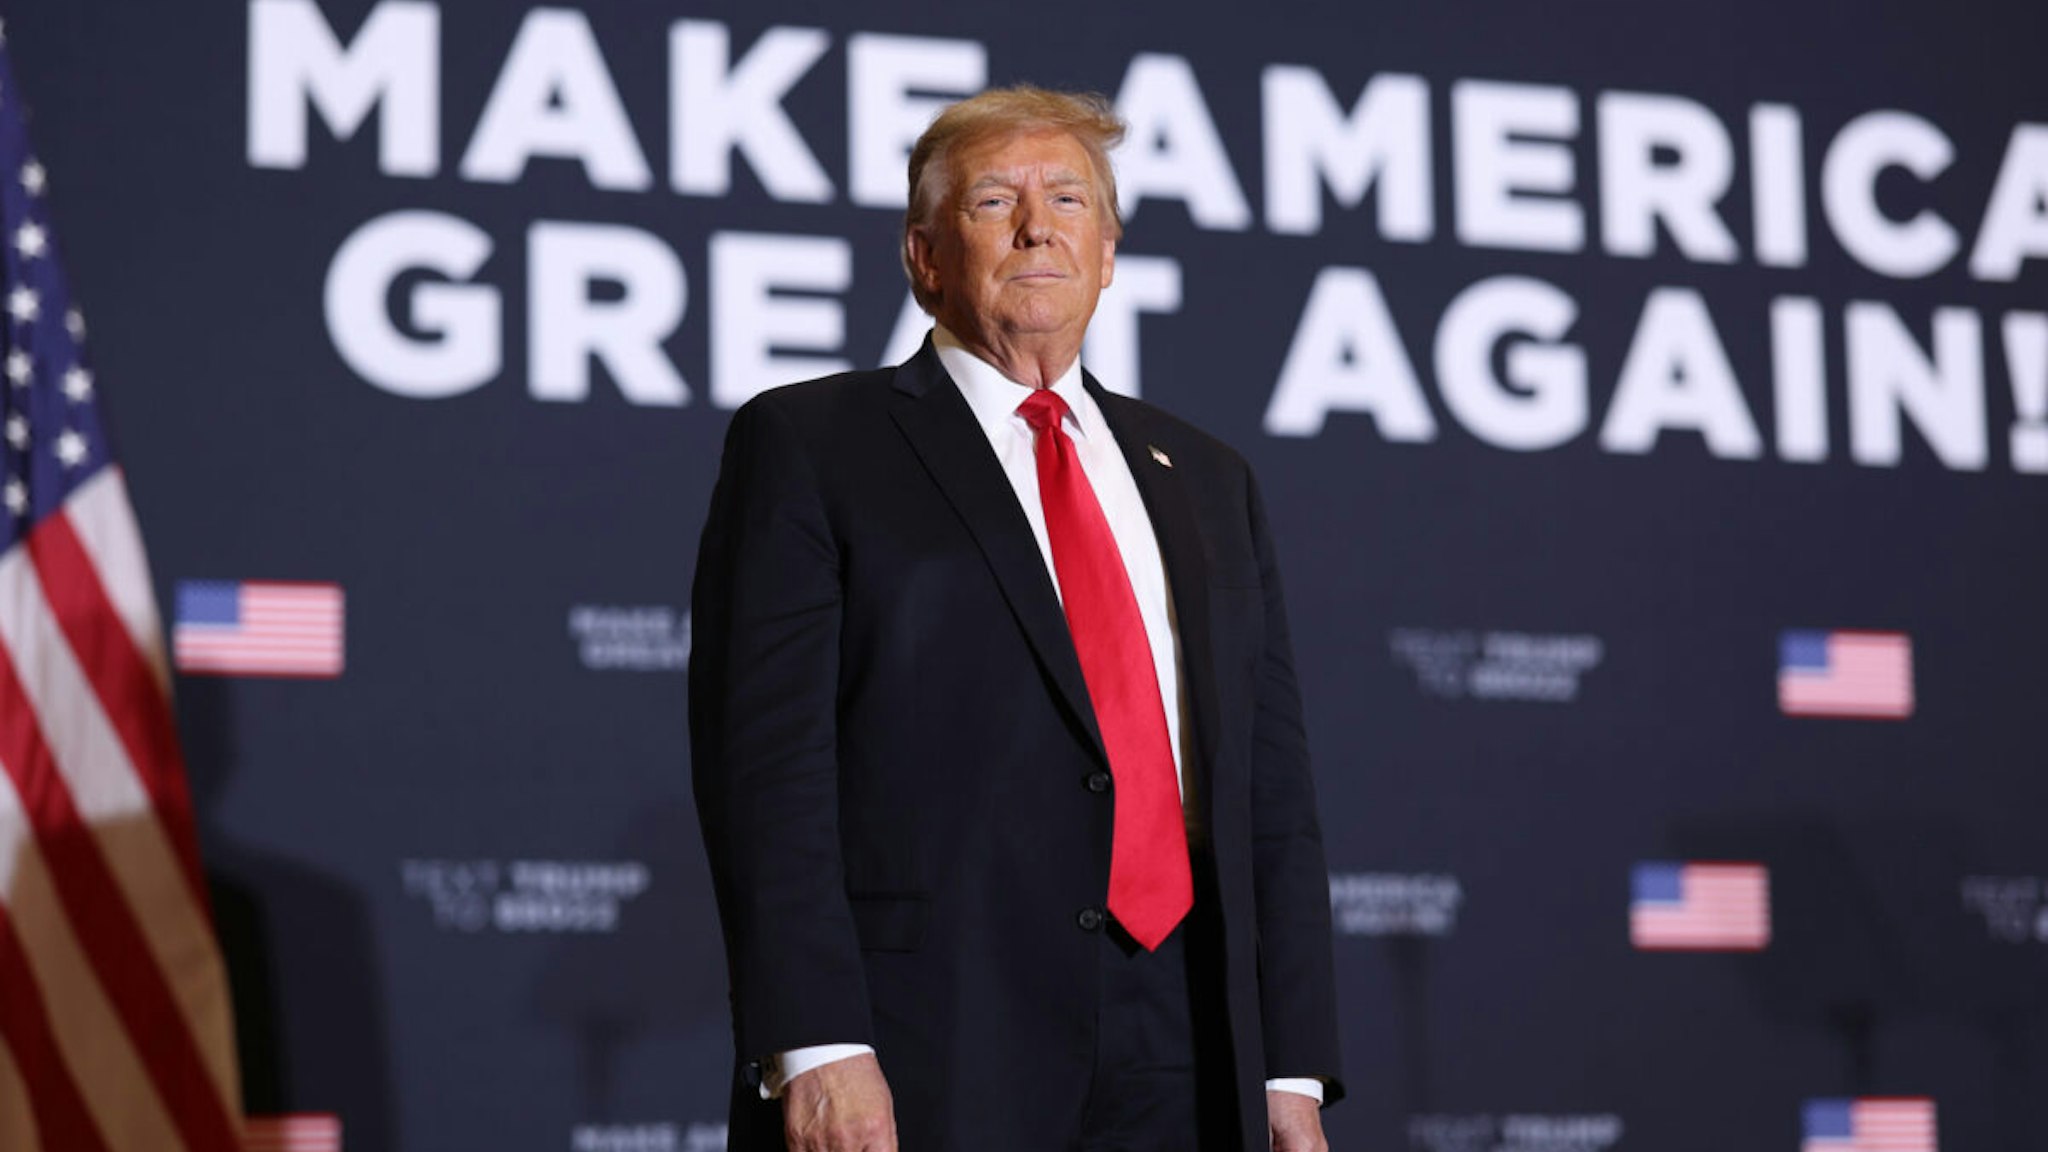 CORALVILLE, IOWA - DECEMBER 13: Republican presidential candidate, former President Donald Trump arrives at a campaign event at the Hyatt Hotel on December 13, 2023 in Coralville, Iowa. Iowa Republicans will caucus on January 15, the first in the presidential nomination process in the 2024 presidential race.